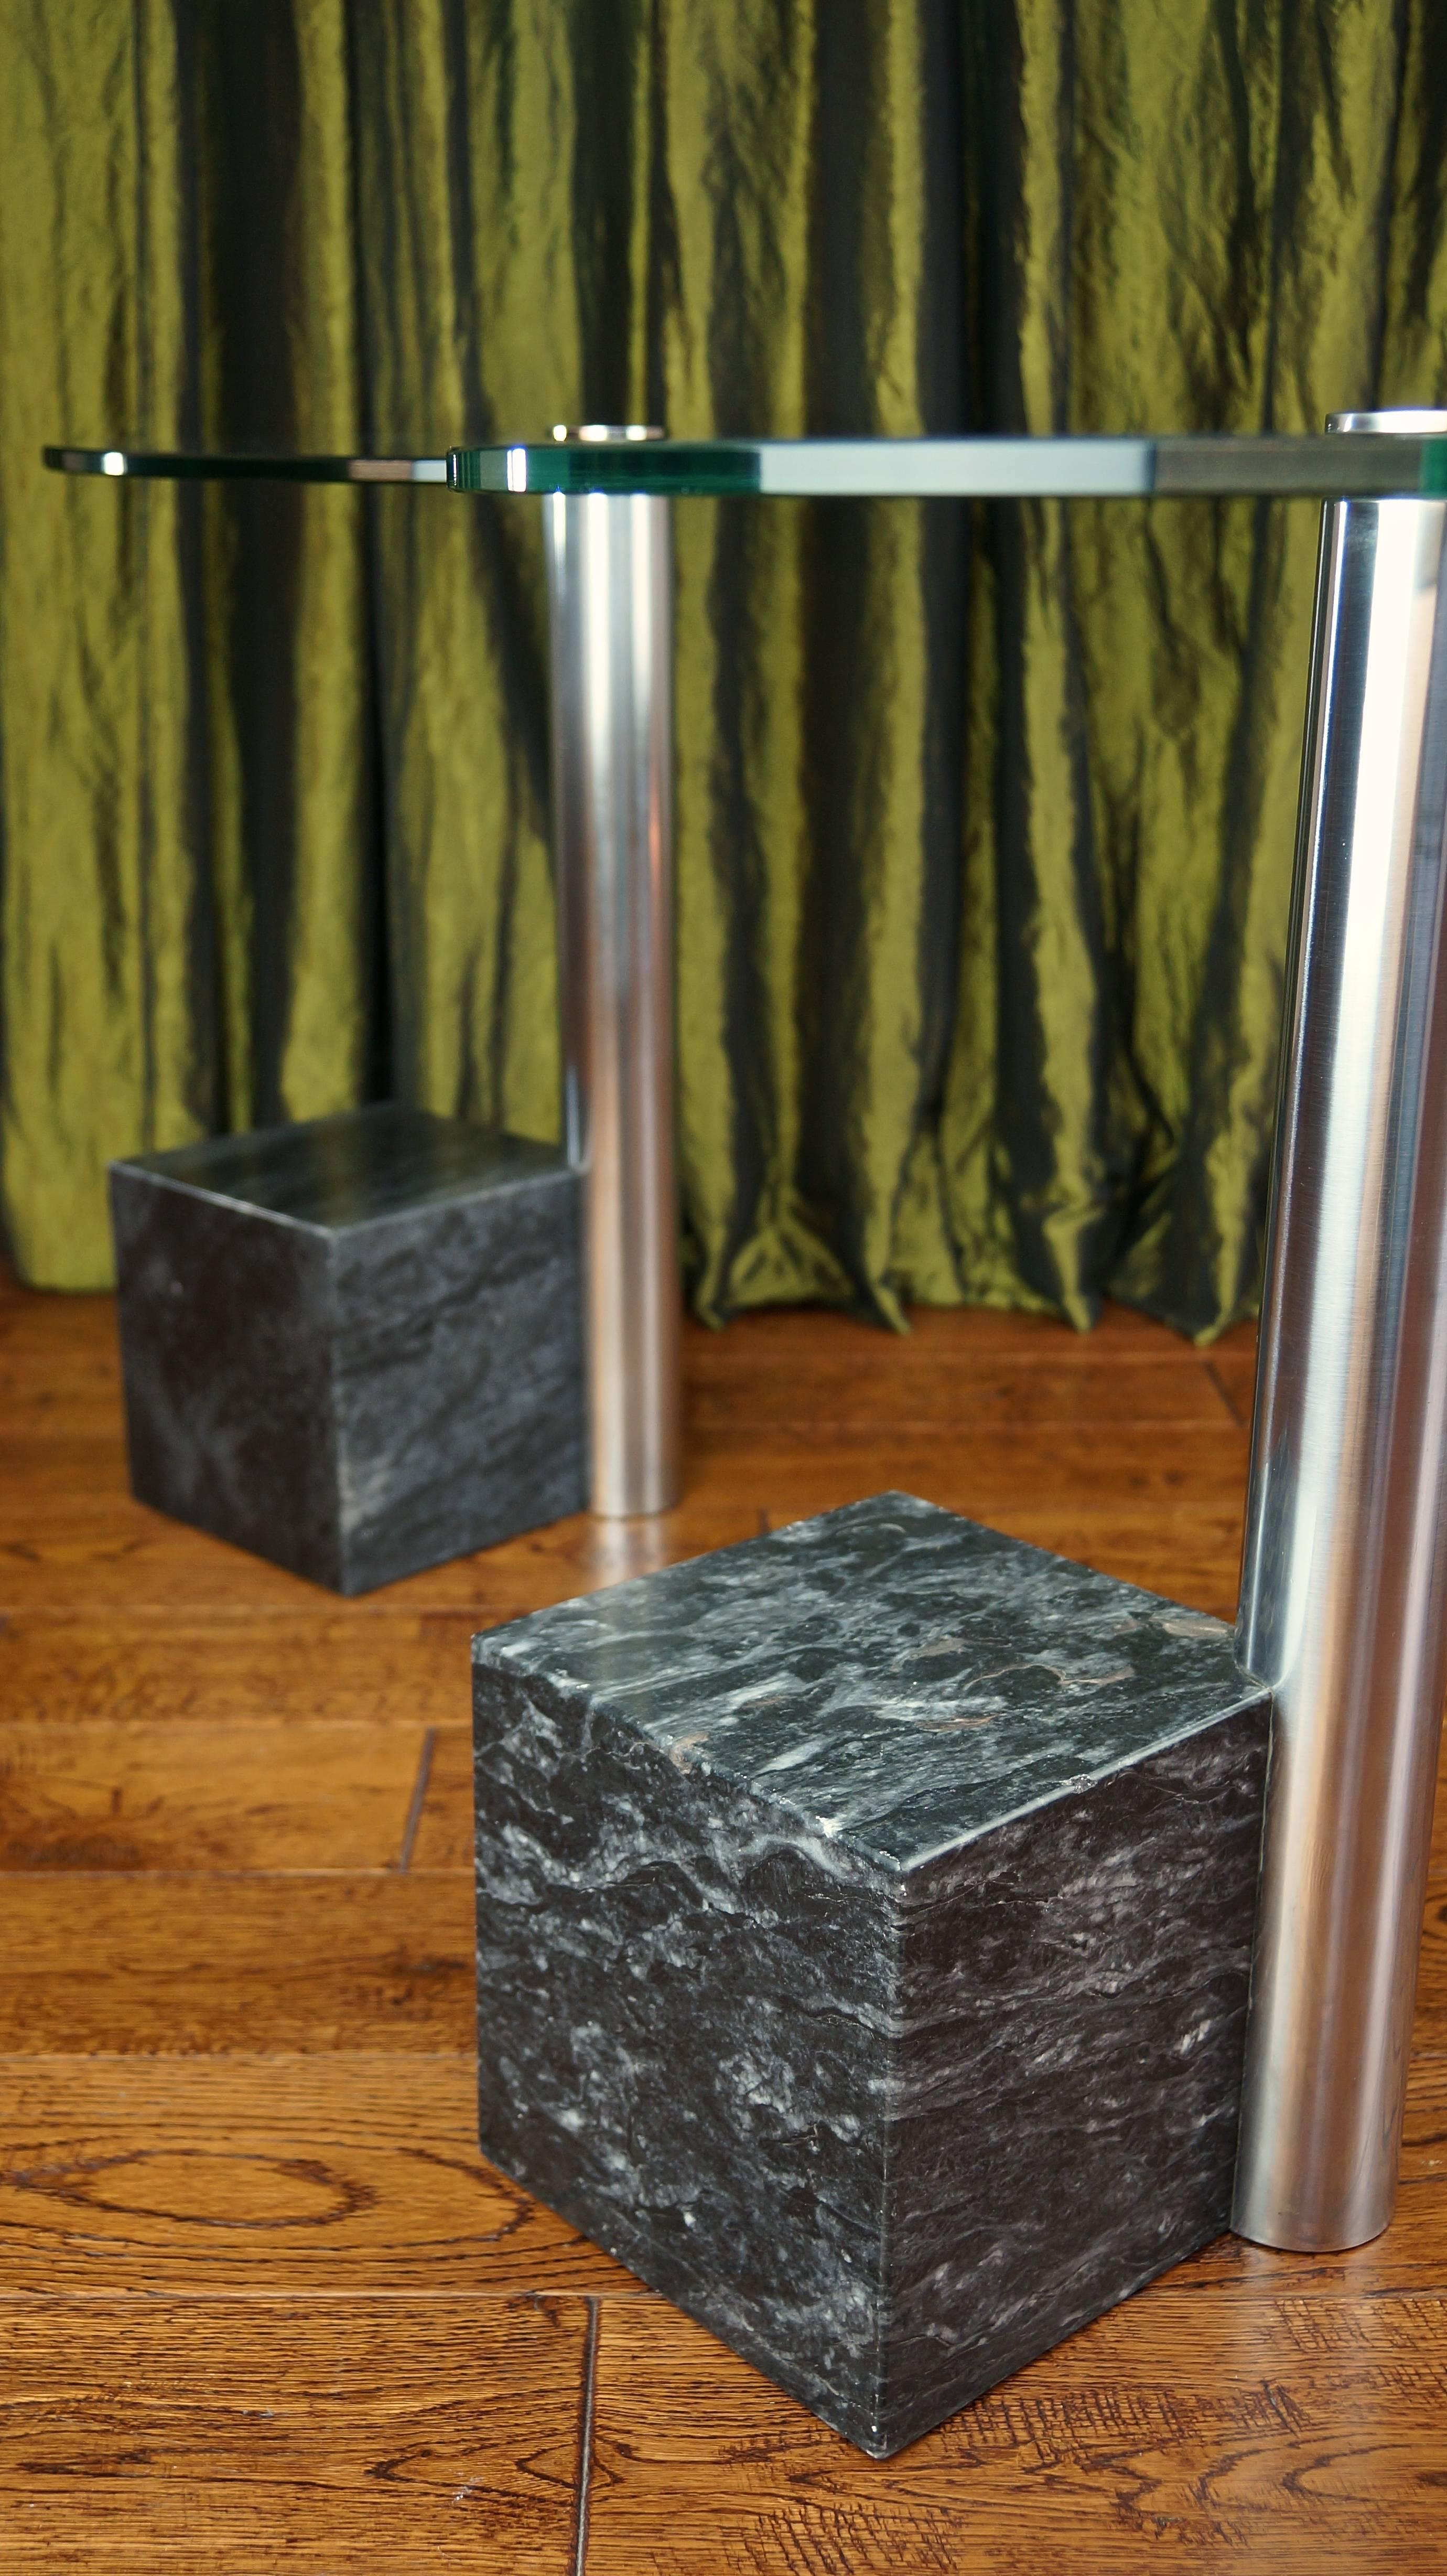 Pair of Vintage Marble and Glass HK2 Side Tables by Hank Kwint, Metaform 1980s For Sale 7